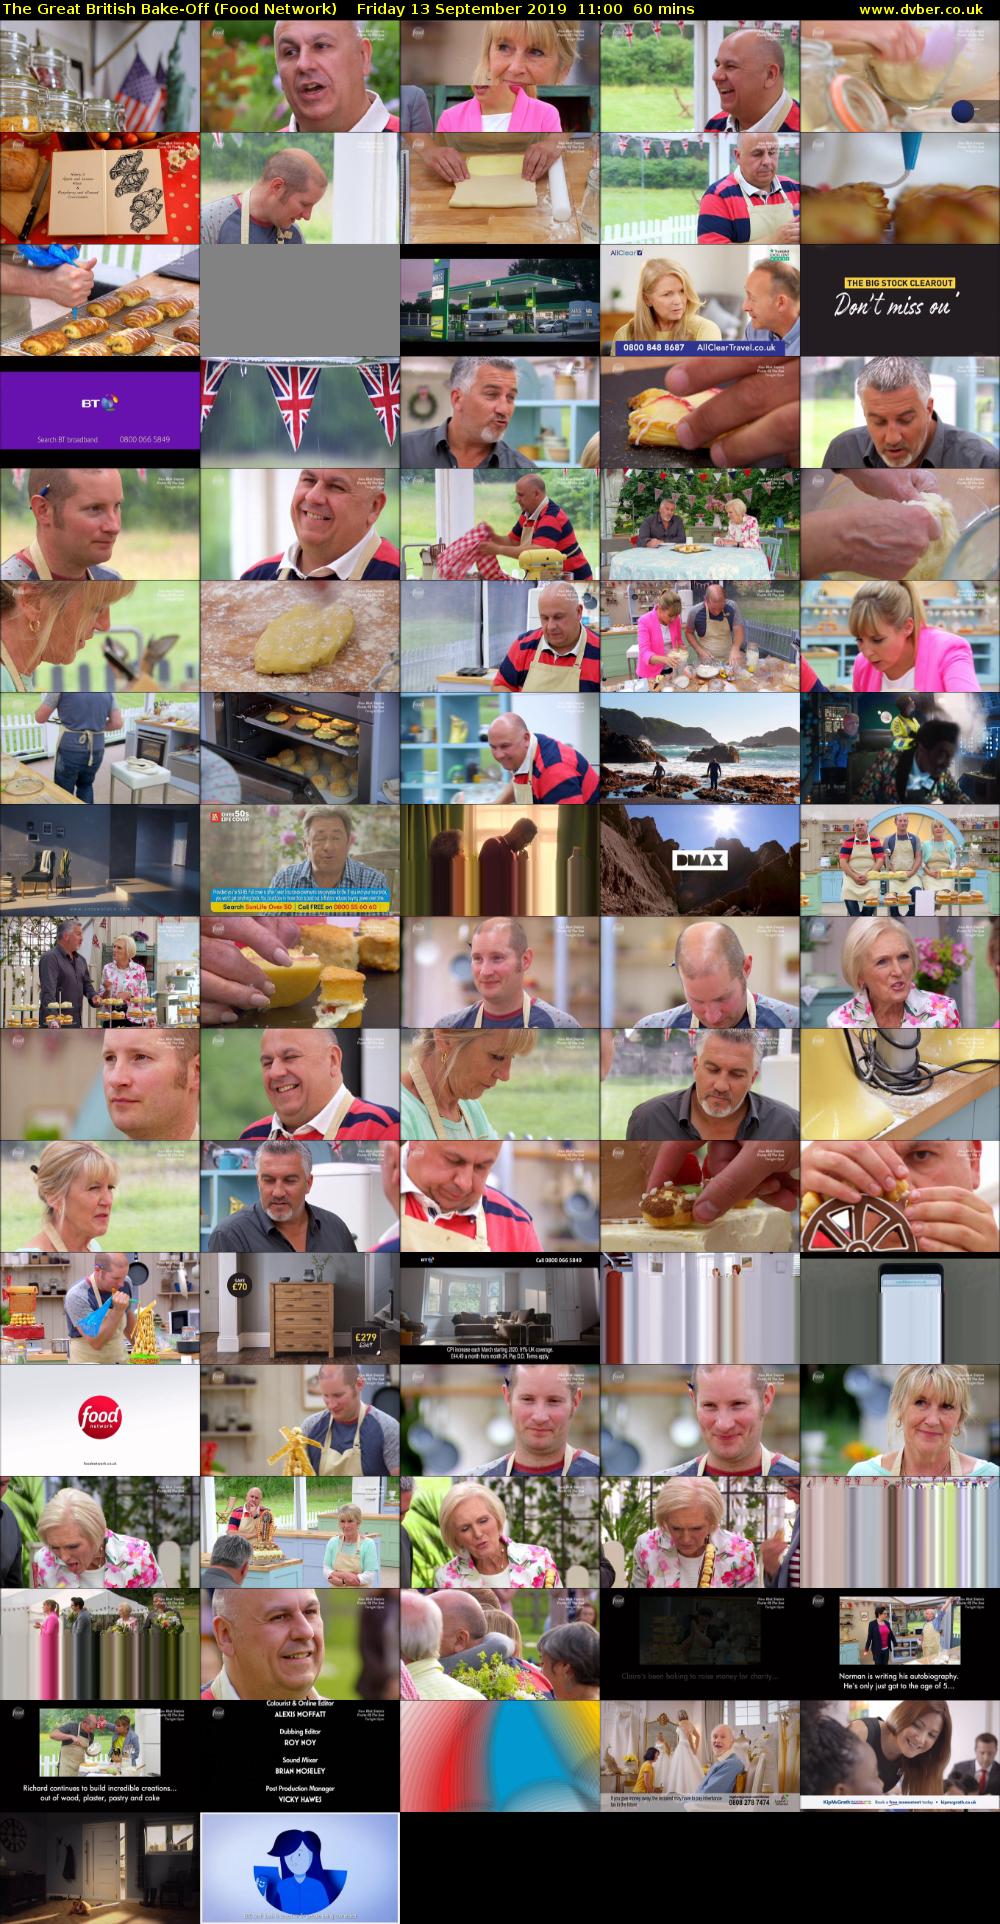 The Great British Bake-Off (Food Network) Friday 13 September 2019 11:00 - 12:00